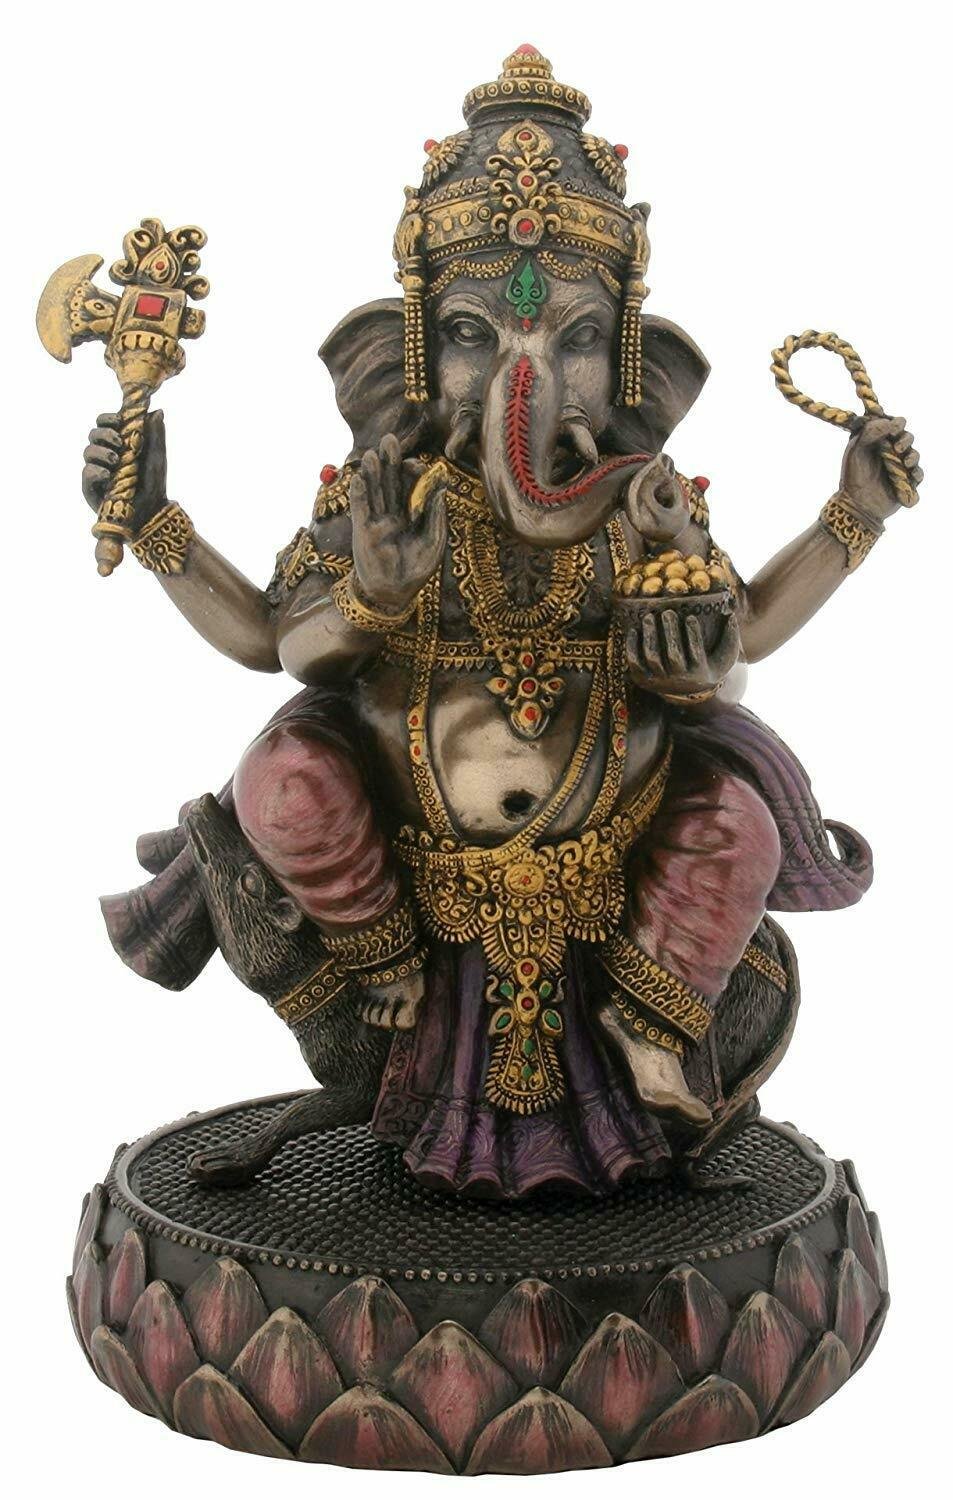 8 Inch Cold Cast Resin Bejeweled Ganesha Sitting on Mouse Statue